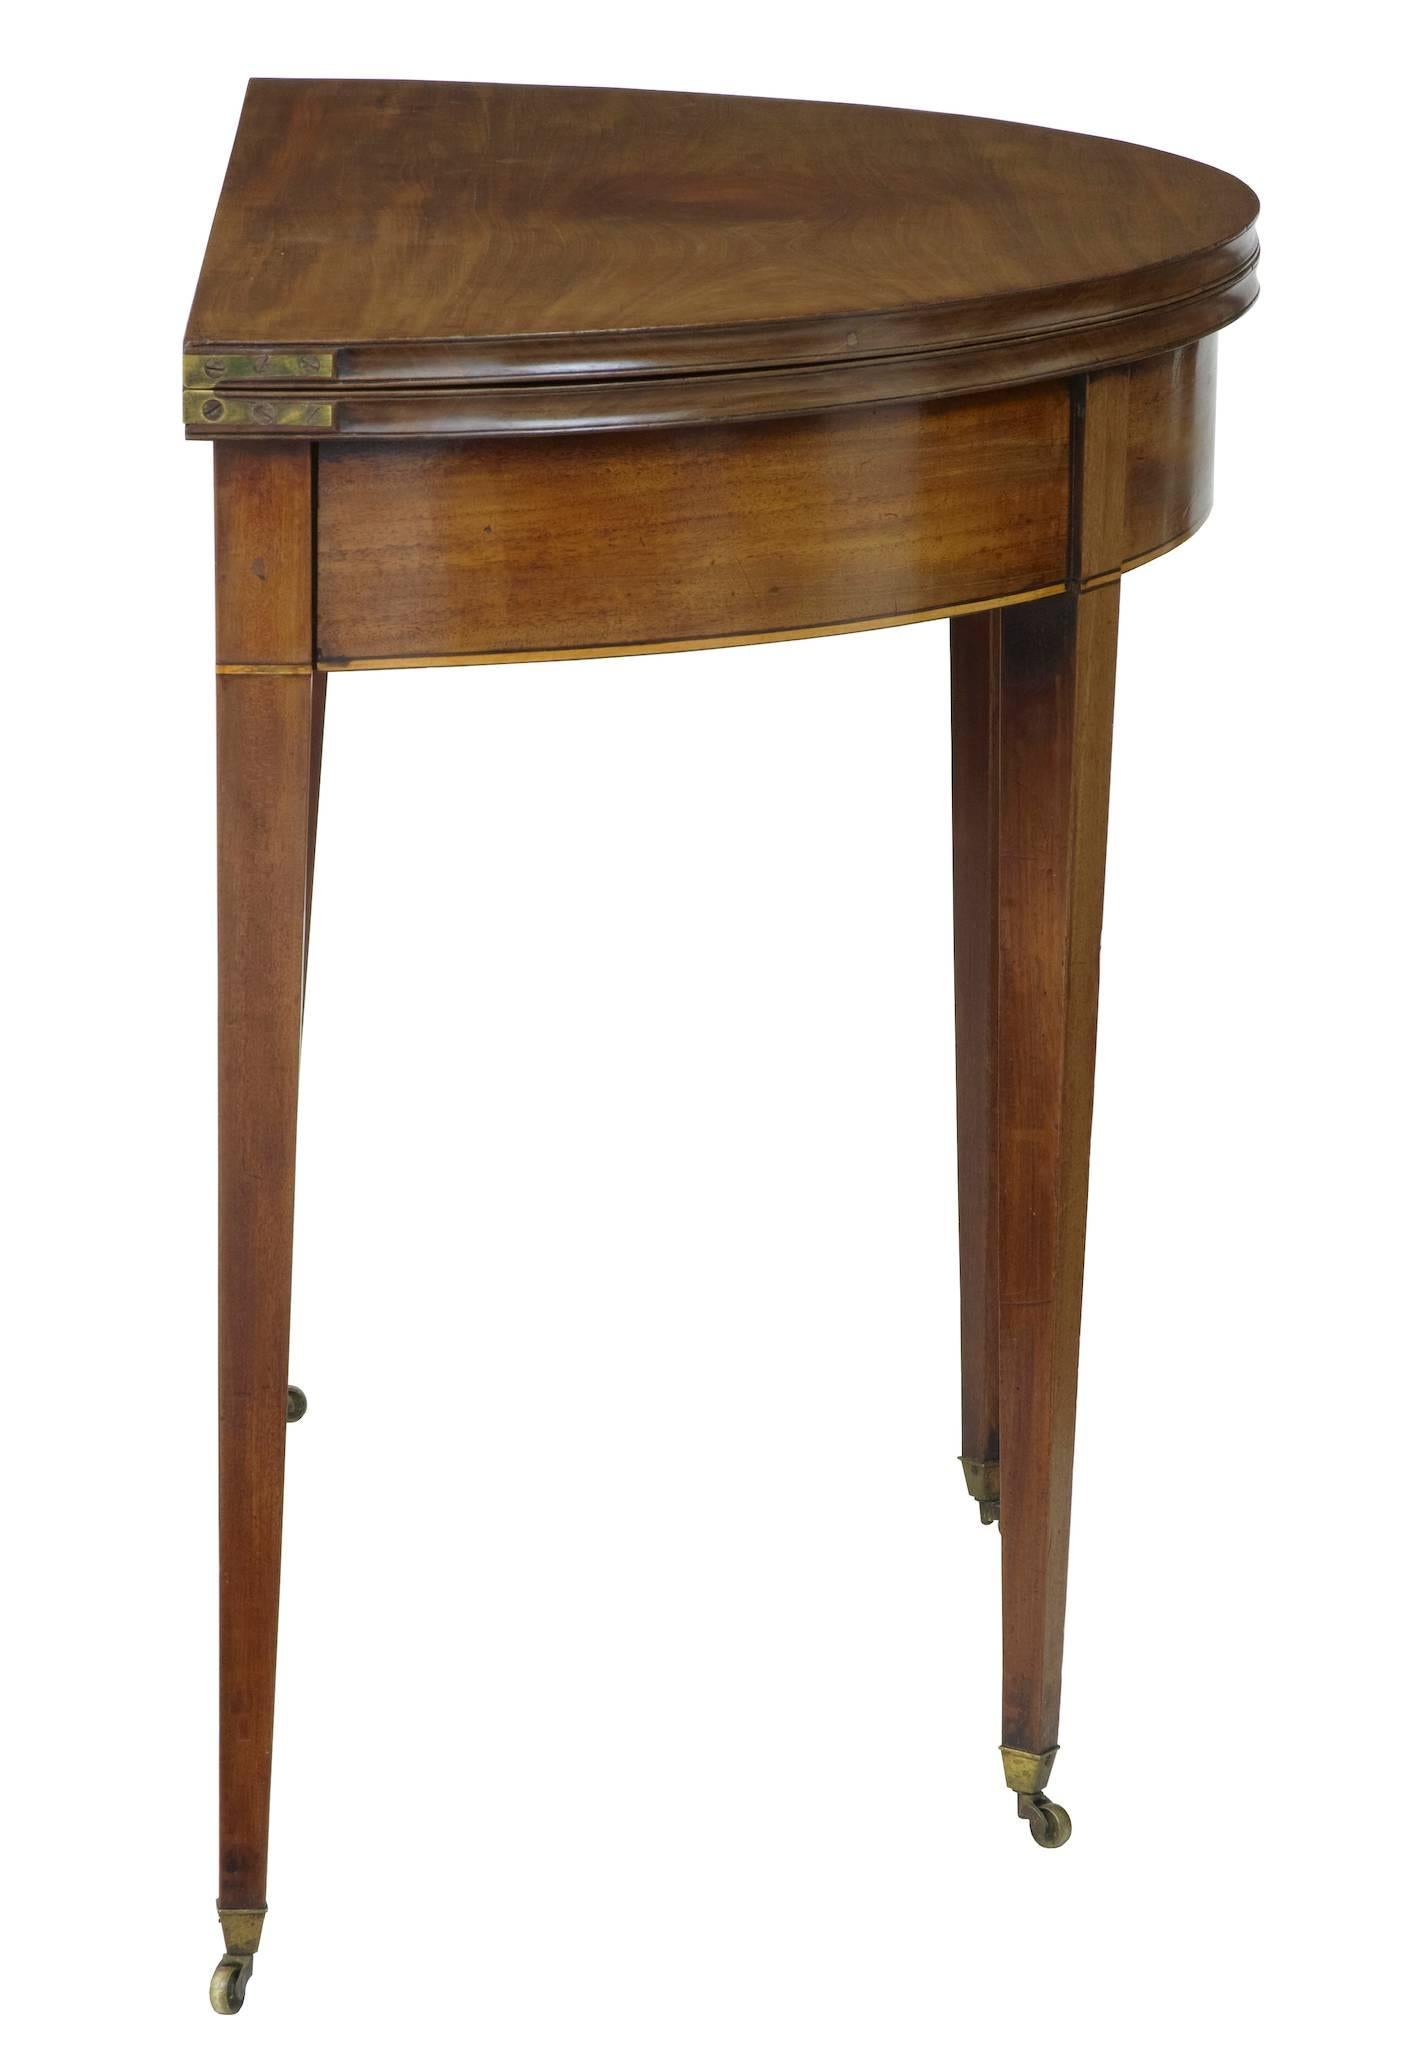 Mahogany card table, circa 1830.
demilune shaped with satinwood and ebony stringing to front.
Original color on the interior.
Standing on four tapering legs with brass castors.

Height: 28 3/4